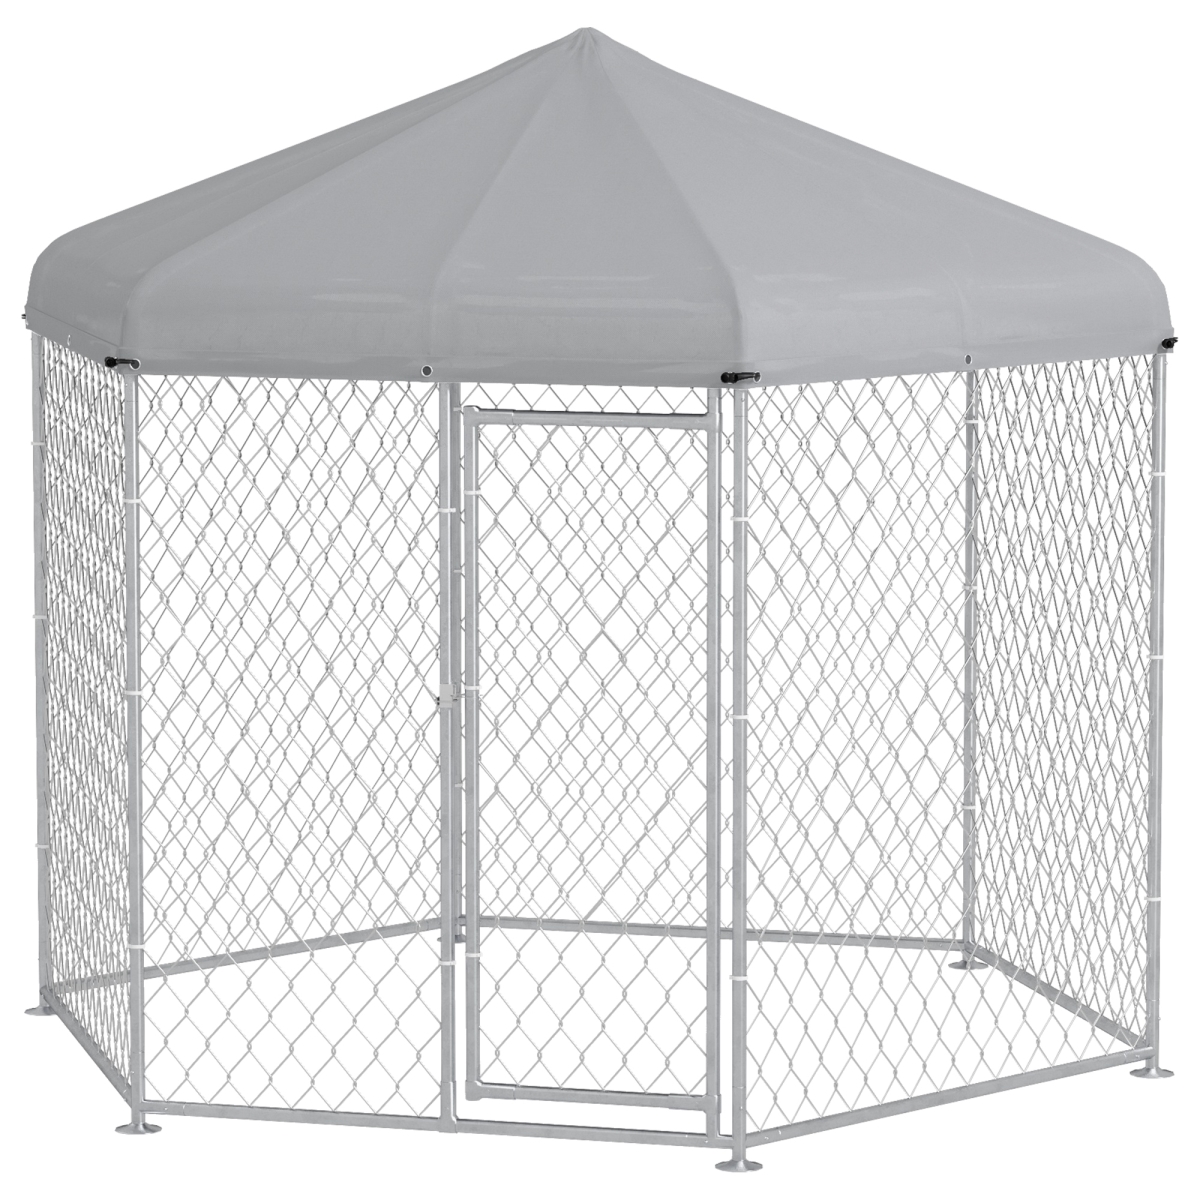 Picture of 212 Main D02-181V01SR 9.2 x 8 x 7.7 ft. PawHut Dog Kennel Outdoor for Medium & Large-Sized Dogs with Waterproof UV Resistant Roof&#44; Silver